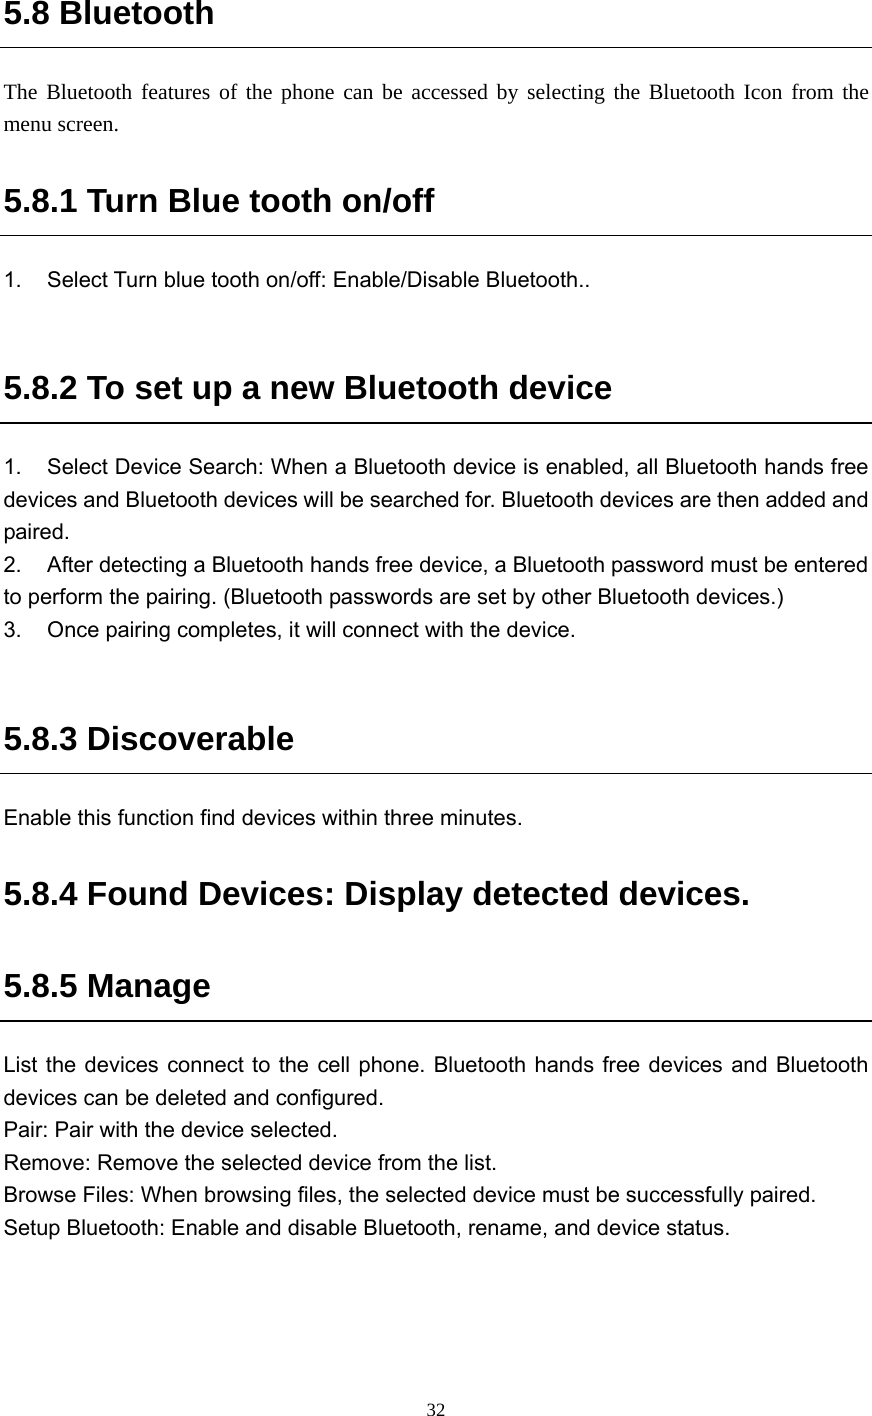  32 5.8 Bluetooth The Bluetooth features of the phone can be accessed by selecting the Bluetooth Icon from the menu screen. 5.8.1 Turn Blue tooth on/off 1.  Select Turn blue tooth on/off: Enable/Disable Bluetooth..  5.8.2 To set up a new Bluetooth device 1.  Select Device Search: When a Bluetooth device is enabled, all Bluetooth hands free devices and Bluetooth devices will be searched for. Bluetooth devices are then added and paired.  2.  After detecting a Bluetooth hands free device, a Bluetooth password must be entered to perform the pairing. (Bluetooth passwords are set by other Bluetooth devices.) 3.  Once pairing completes, it will connect with the device.    5.8.3 Discoverable Enable this function find devices within three minutes. 5.8.4 Found Devices: Display detected devices.   5.8.5 Manage List the devices connect to the cell phone. Bluetooth hands free devices and Bluetooth devices can be deleted and configured.   Pair: Pair with the device selected.   Remove: Remove the selected device from the list.   Browse Files: When browsing files, the selected device must be successfully paired.   Setup Bluetooth: Enable and disable Bluetooth, rename, and device status.       